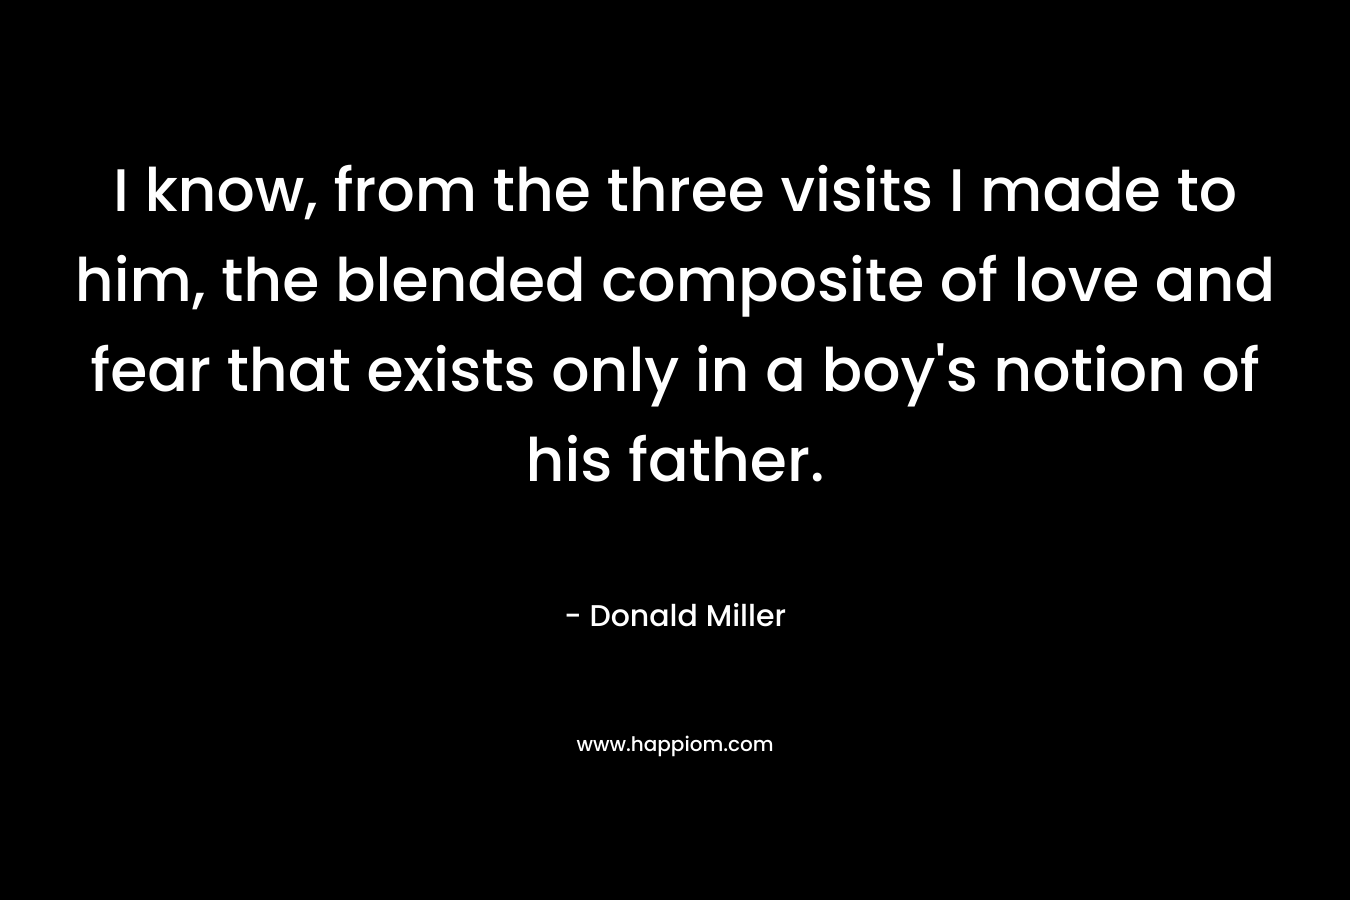 I know, from the three visits I made to him, the blended composite of love and fear that exists only in a boy’s notion of his father. – Donald Miller